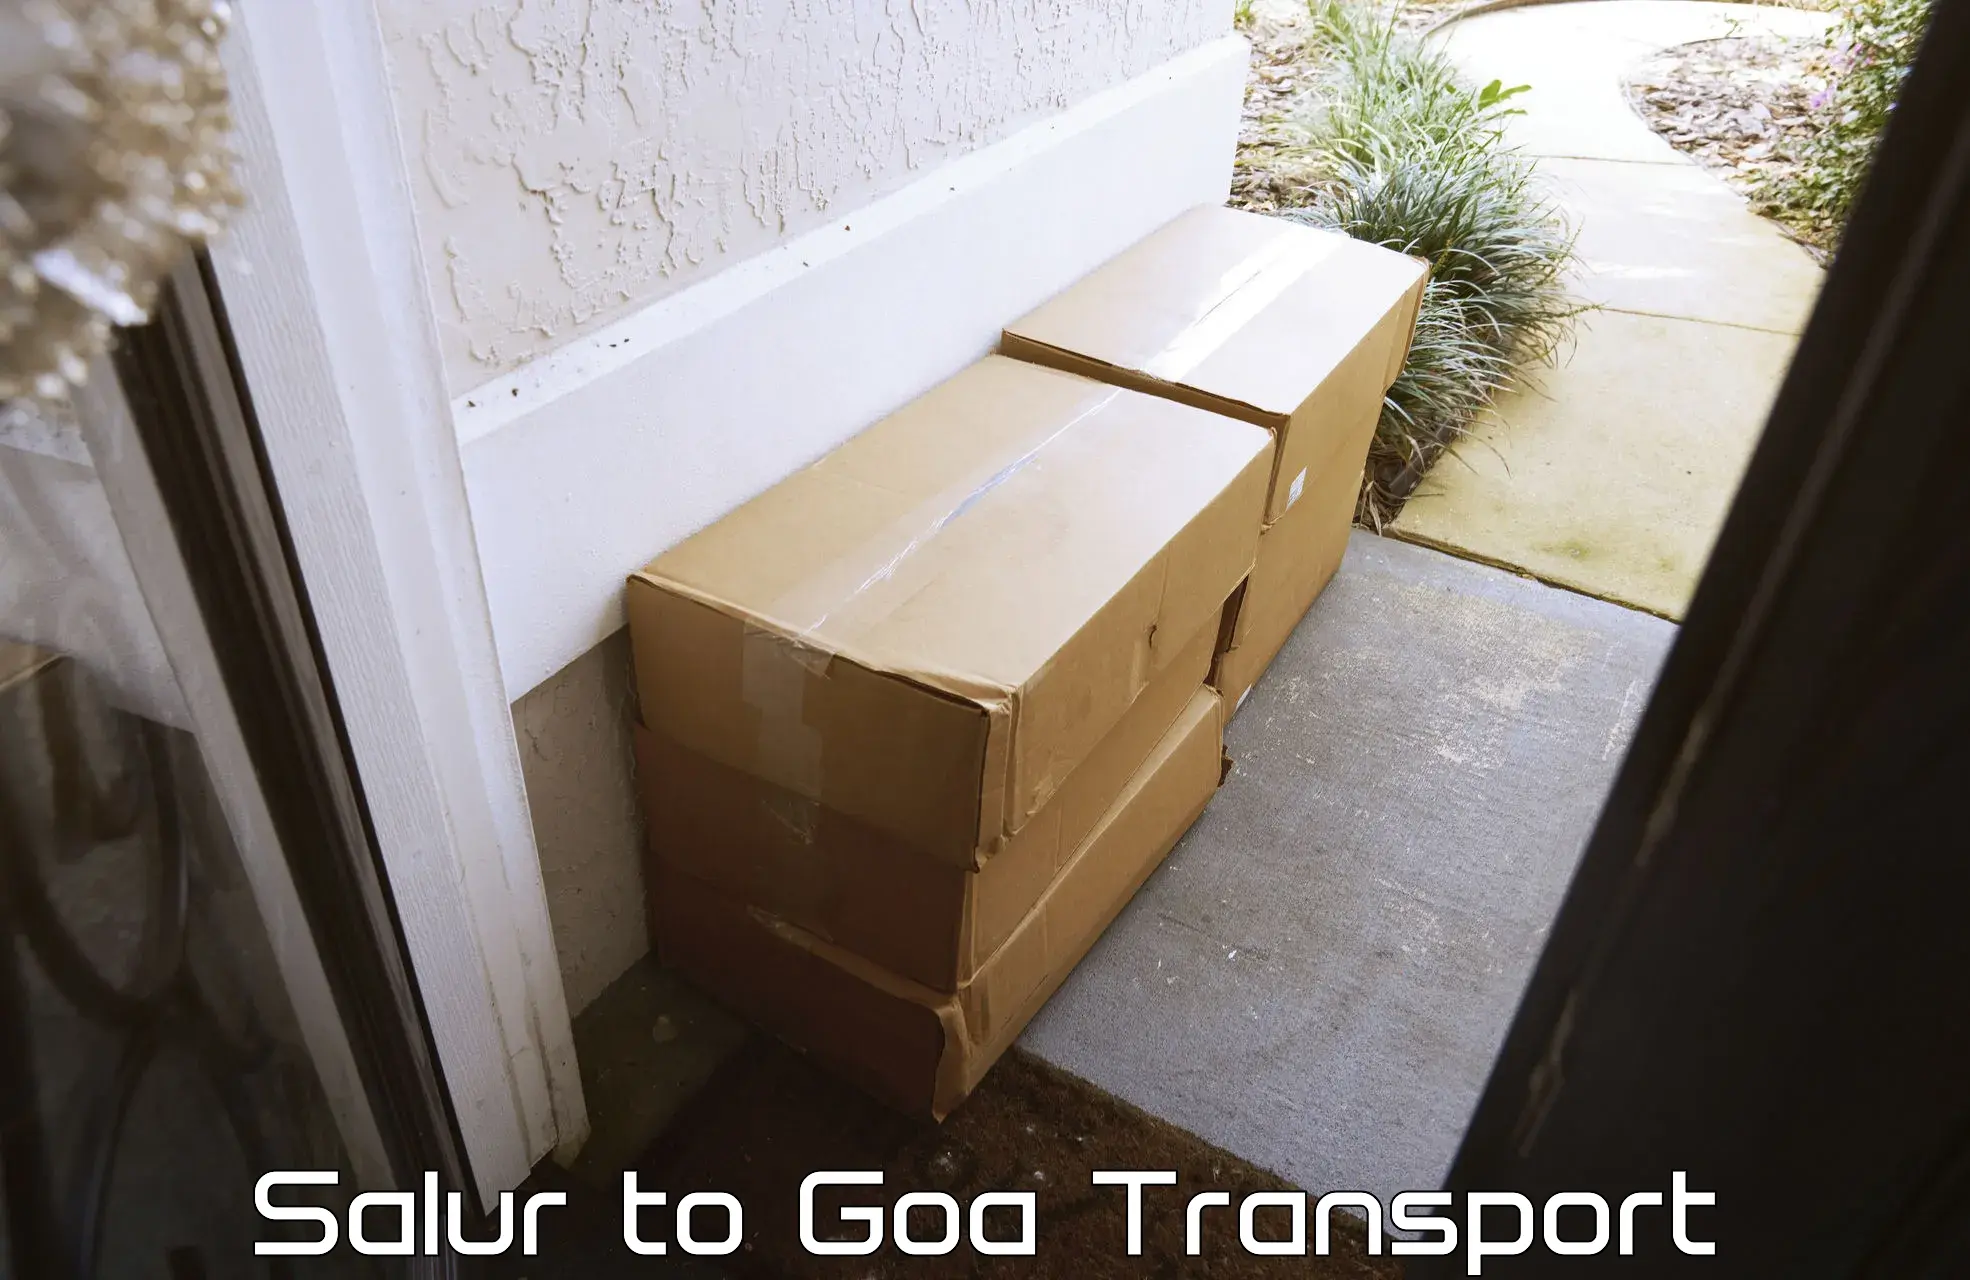 Vehicle transport services Salur to Goa